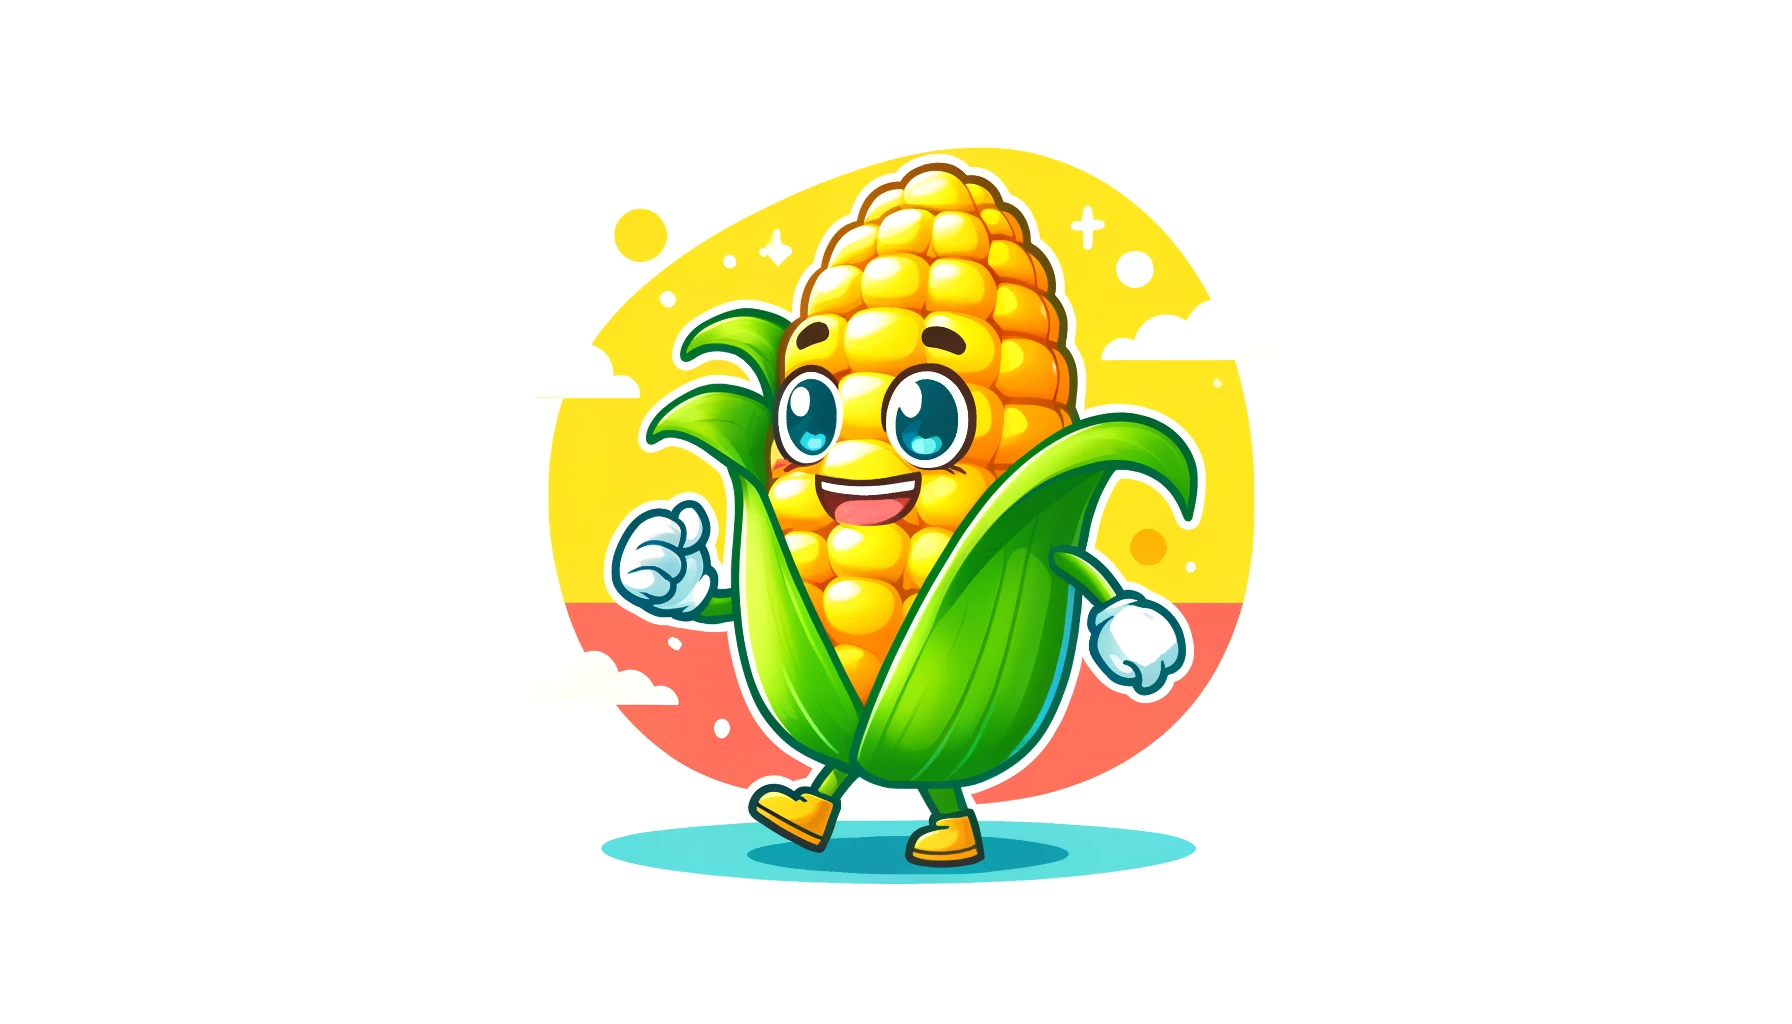 Corn On The Cob Day: Fun Ideas and Messages